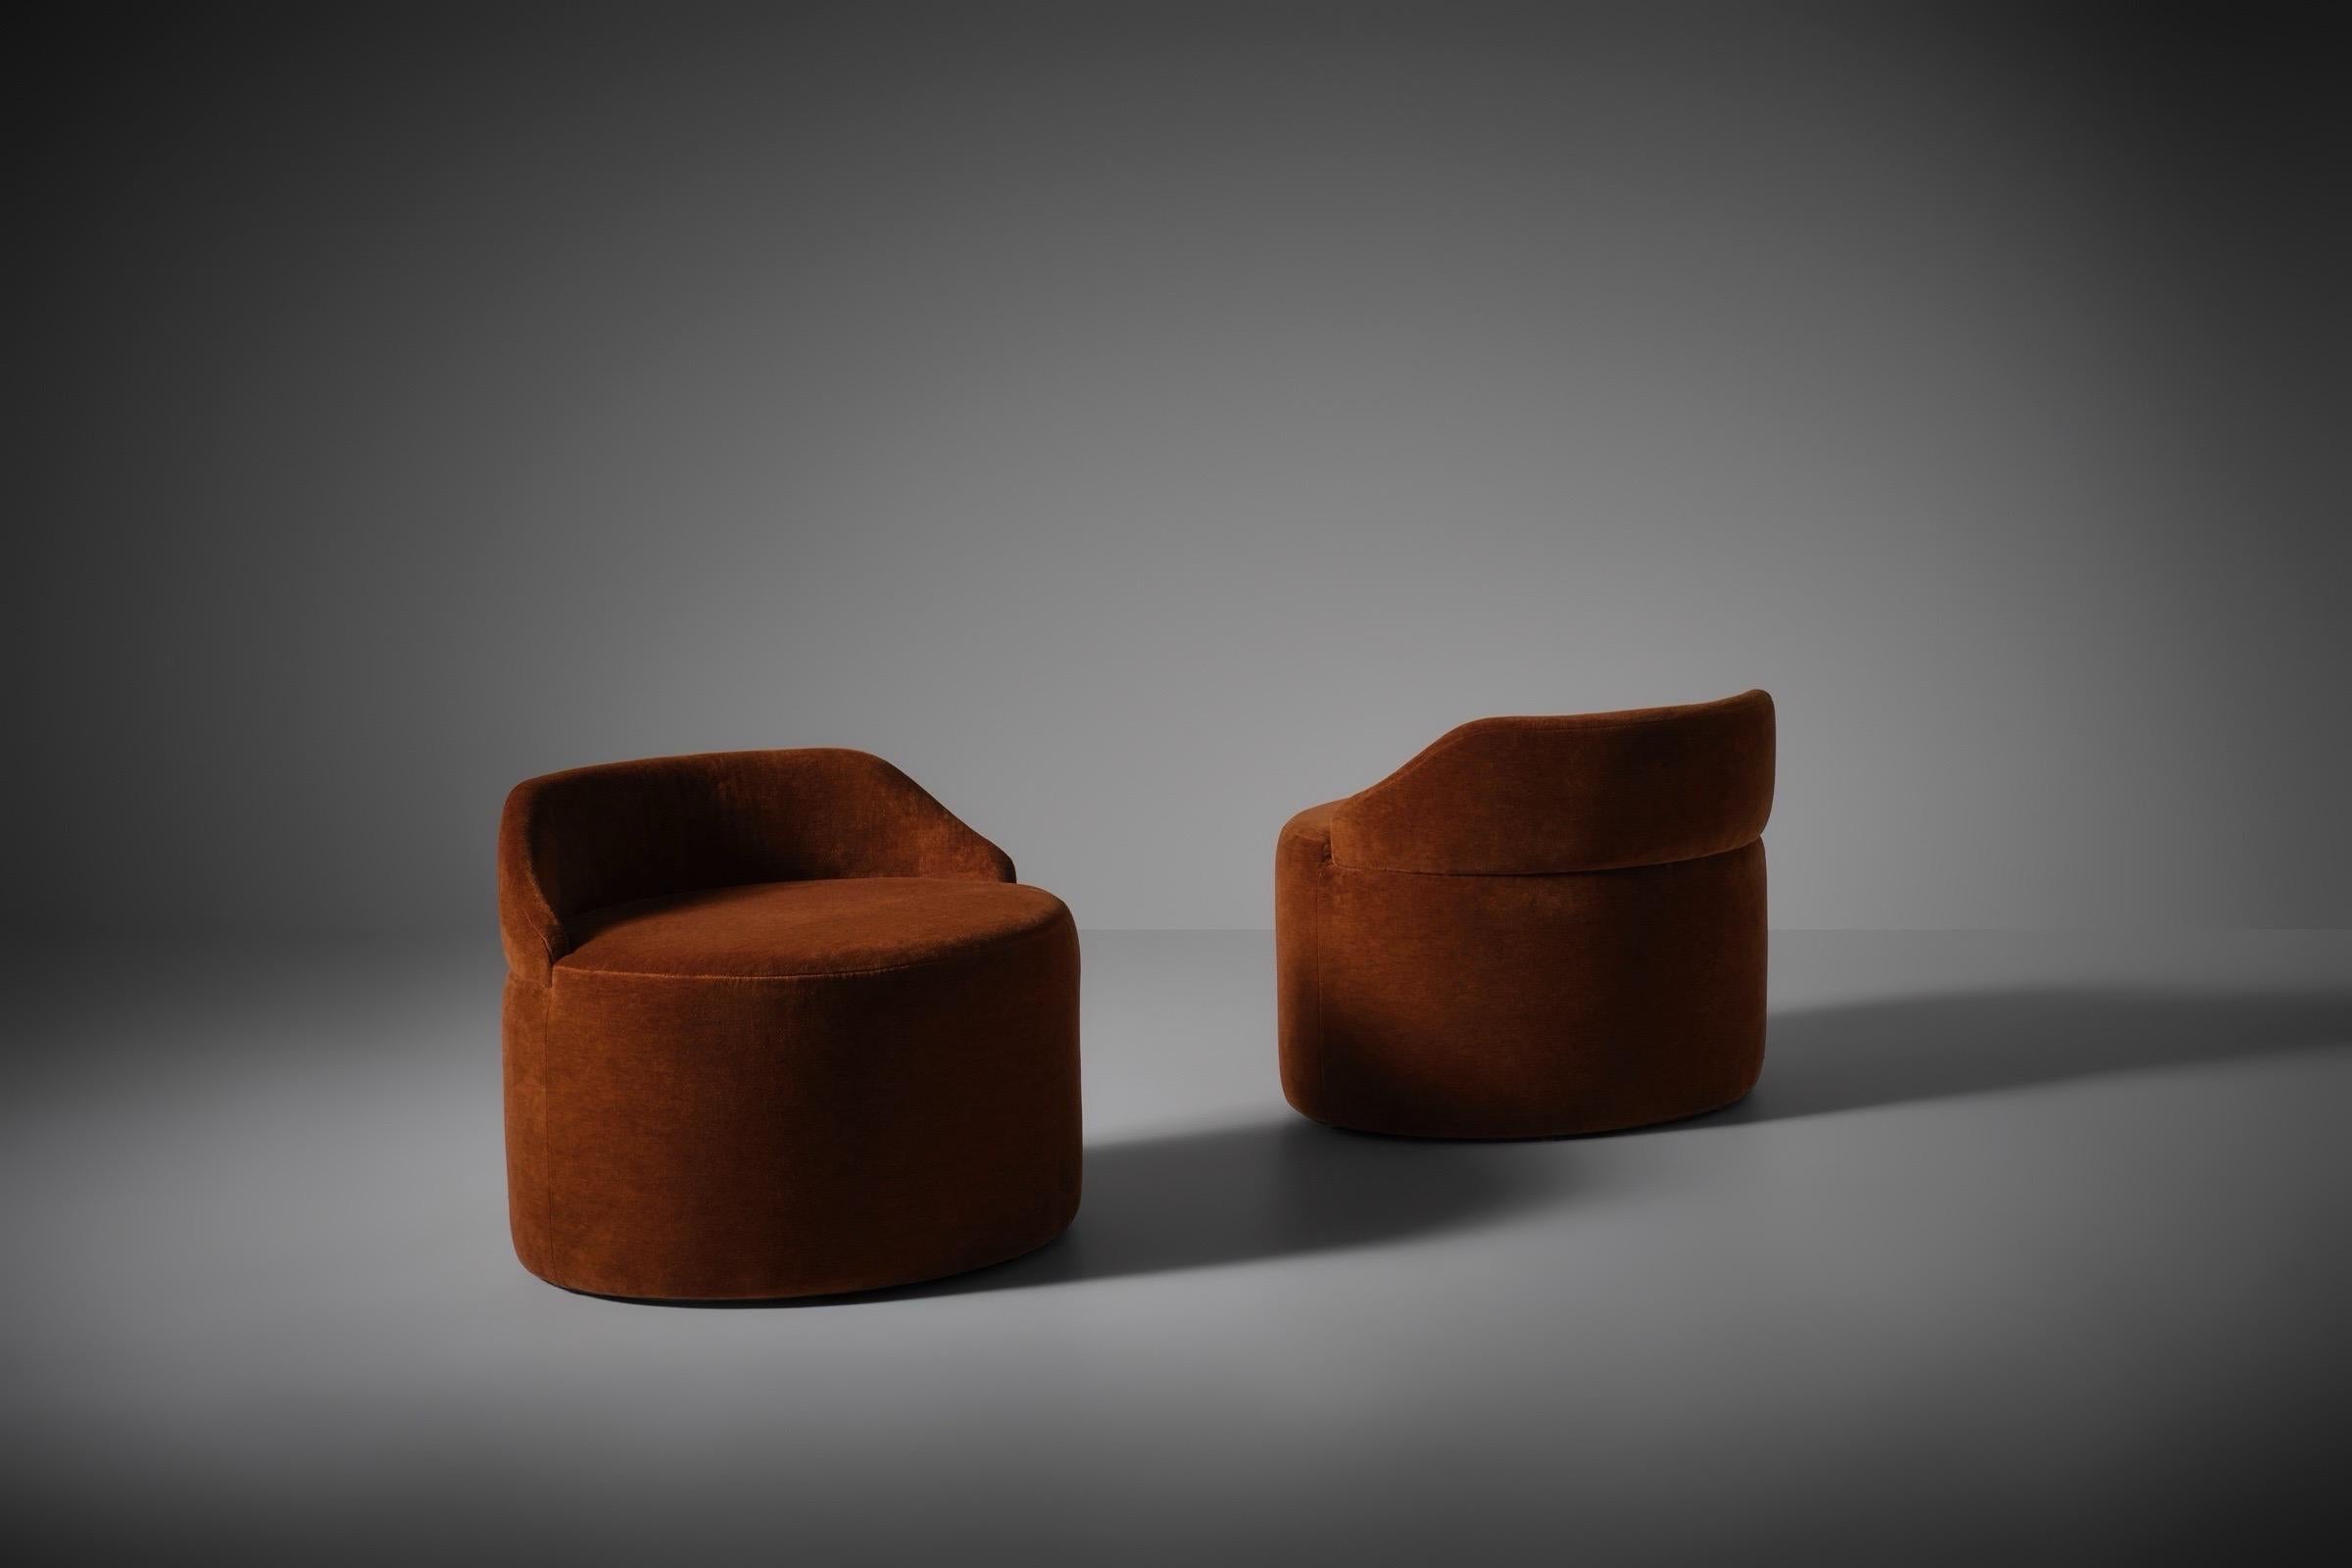 Rare low stools by Luigi Caccia Dominioni for Azucena, Italy ca. 1960. Elegant design with typical Dominioni lines, created out of an oval base and arch shaped backrests. The stools are upholstered in a beautiful warm burnt orange velvet.